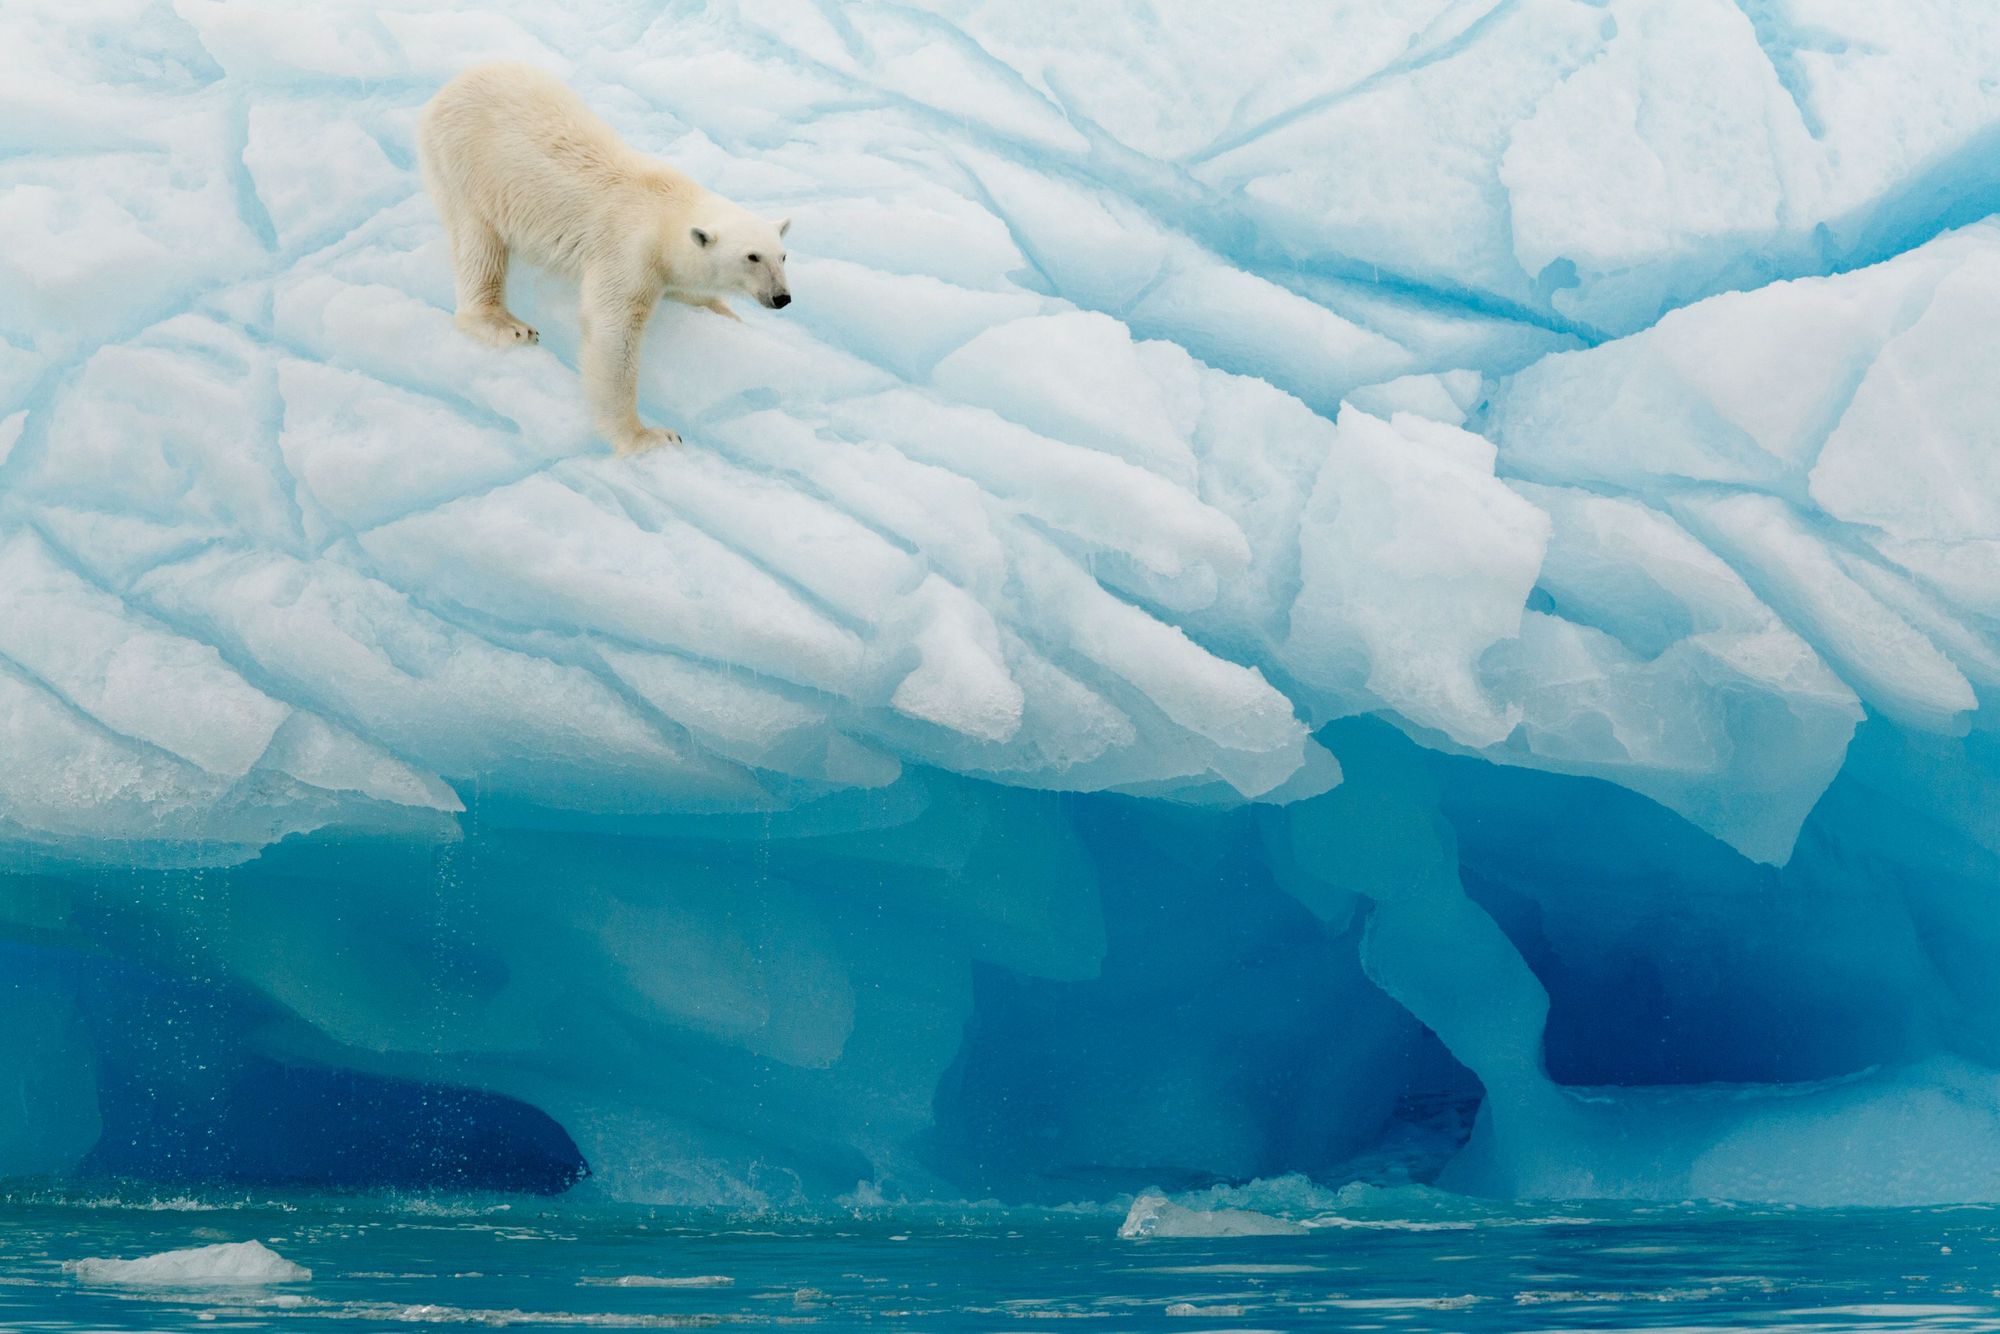 You would be a lucky person to spot this sight; a polar bear looking for food in the waters of Svalbard. Photo: Getty